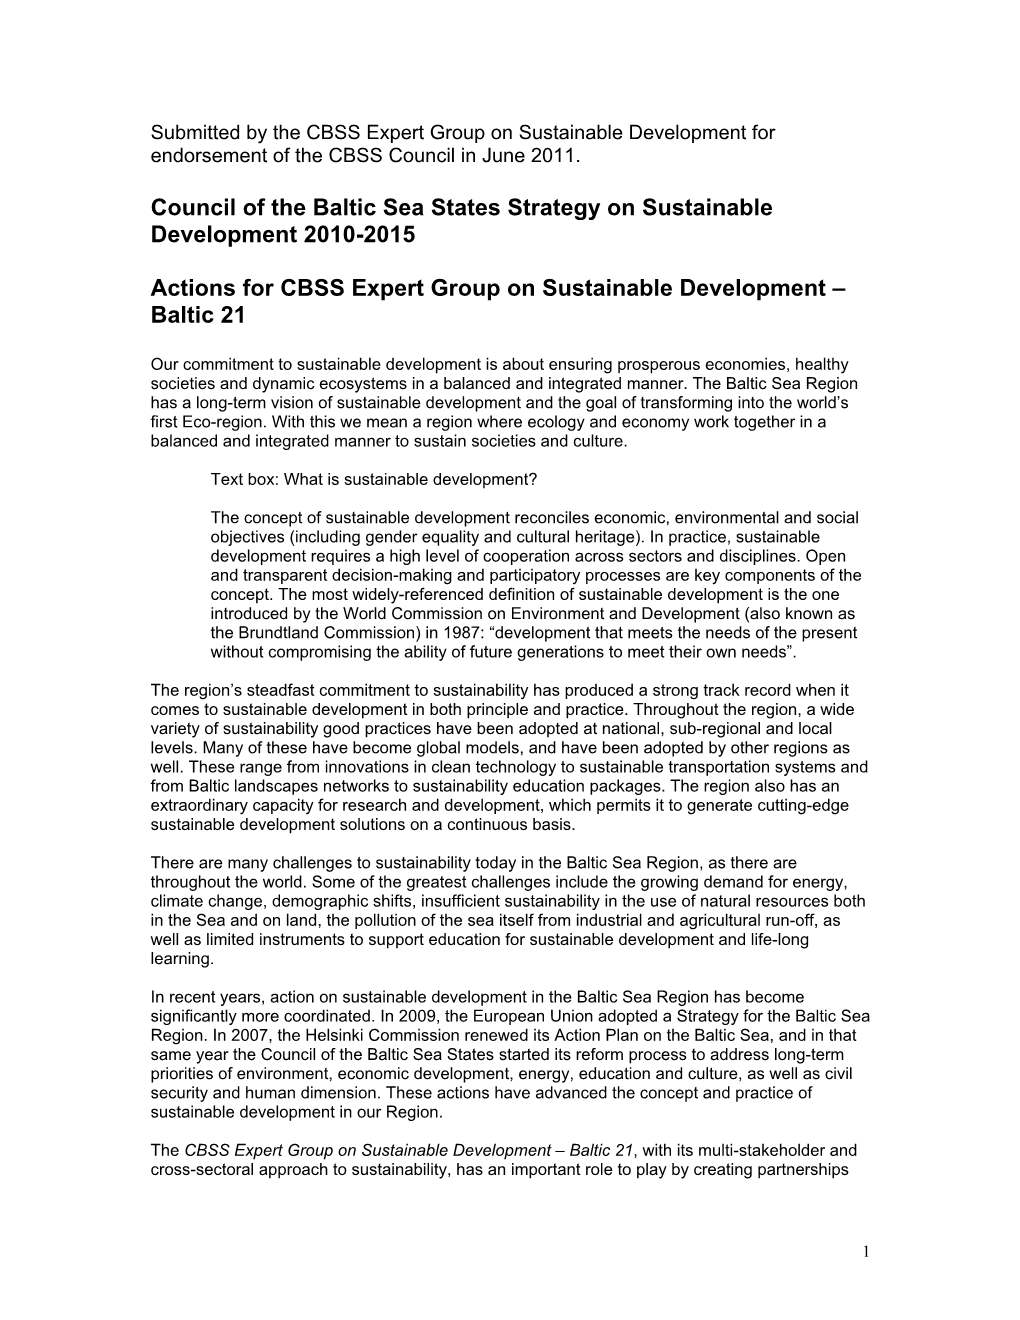 Council of the Baltic Sea States Strategy on Sustainable Development 2010-2015